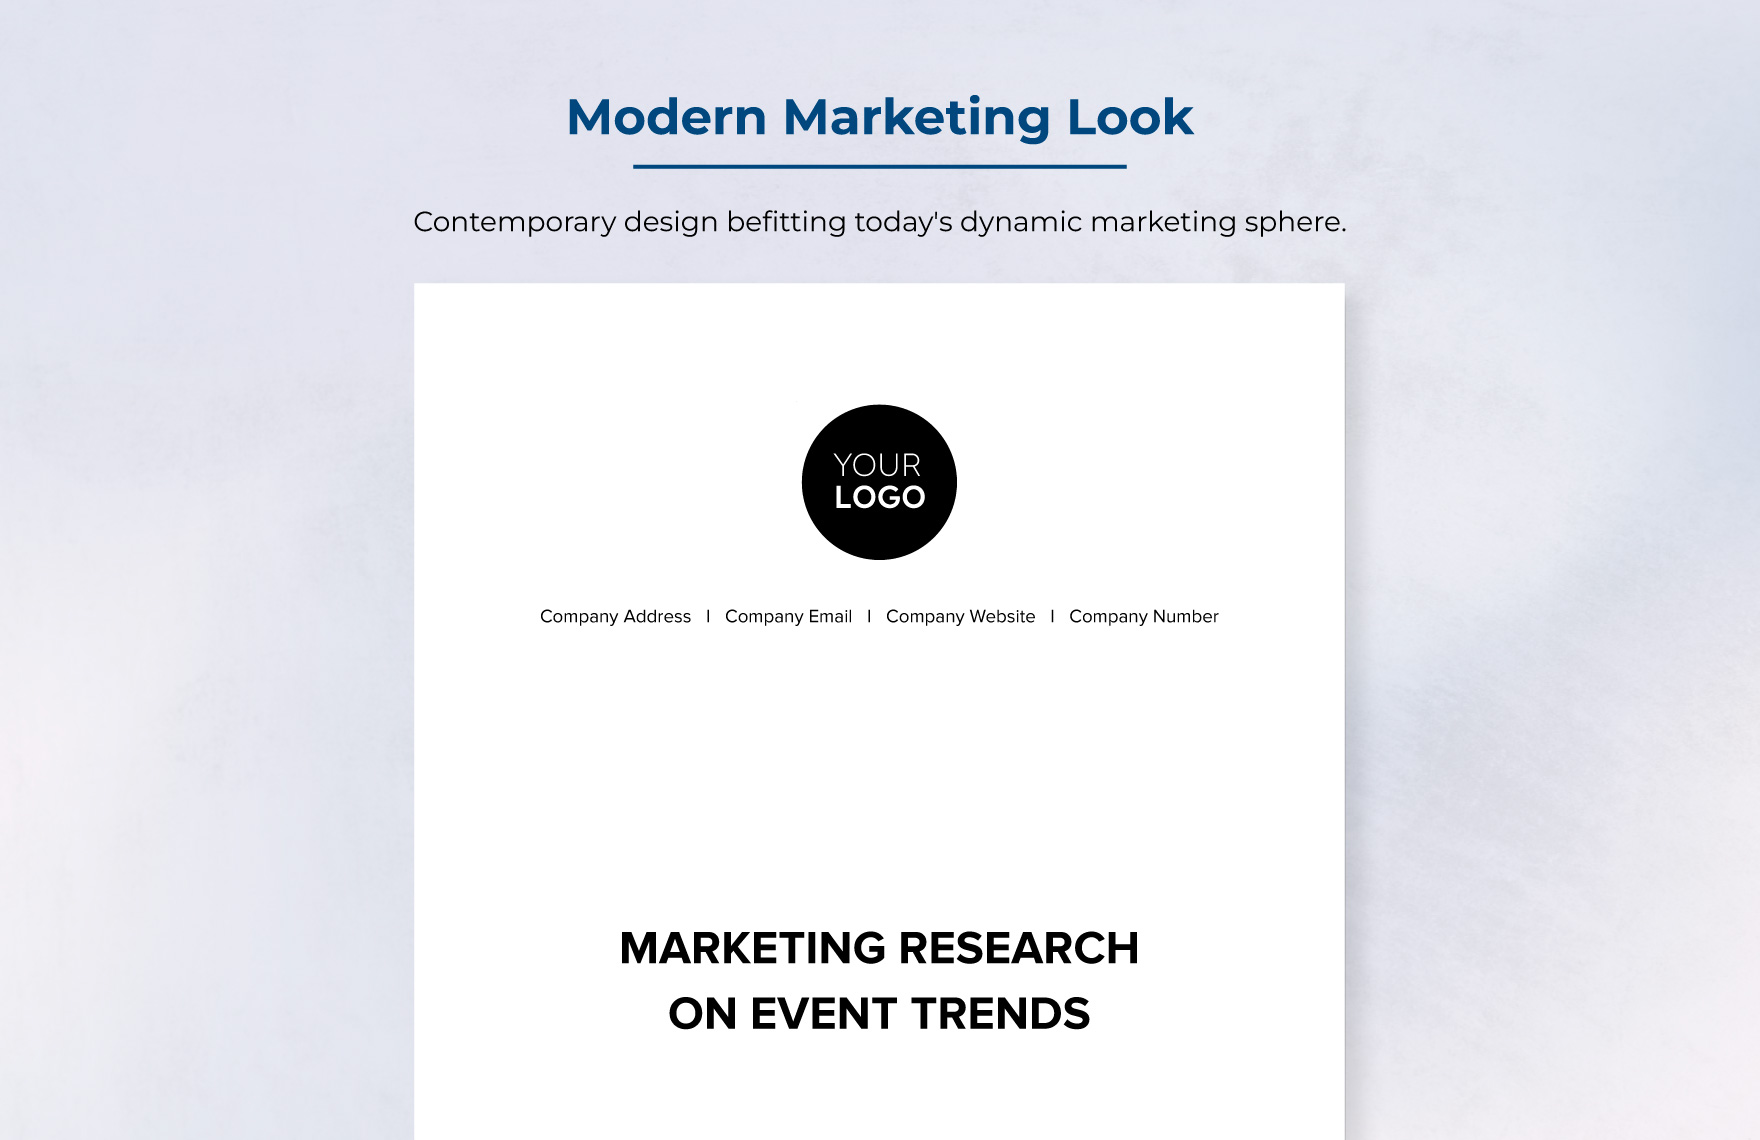 Marketing Research on Event Trends Template